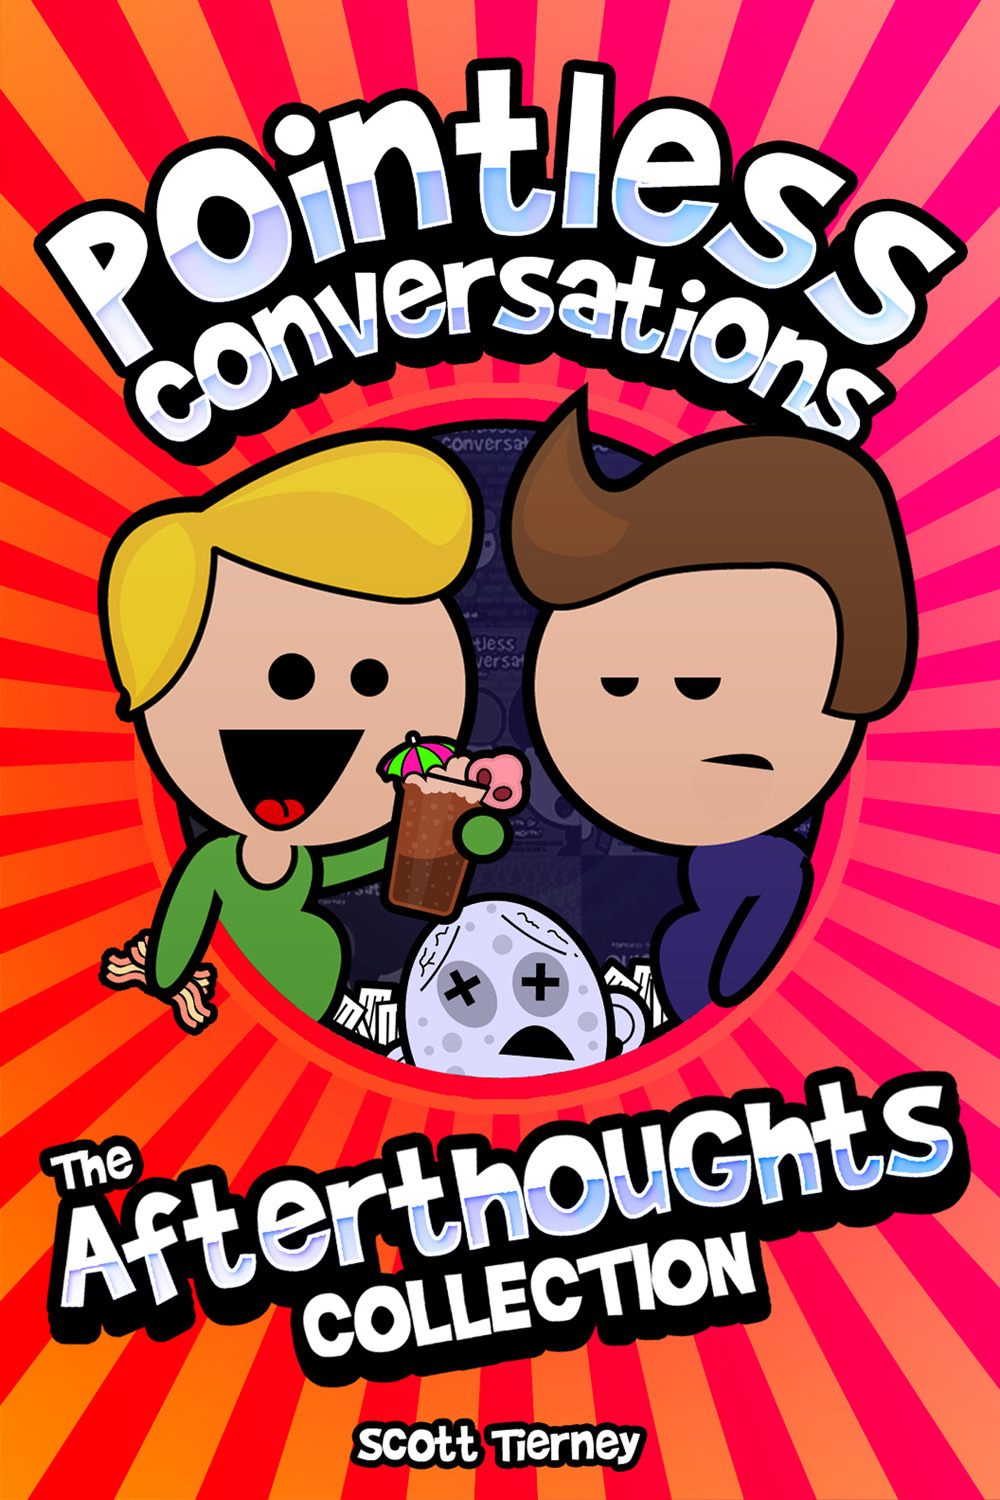 Tierney, Scott - Pointless Conversations - The Afterthoughts Collection, ebook